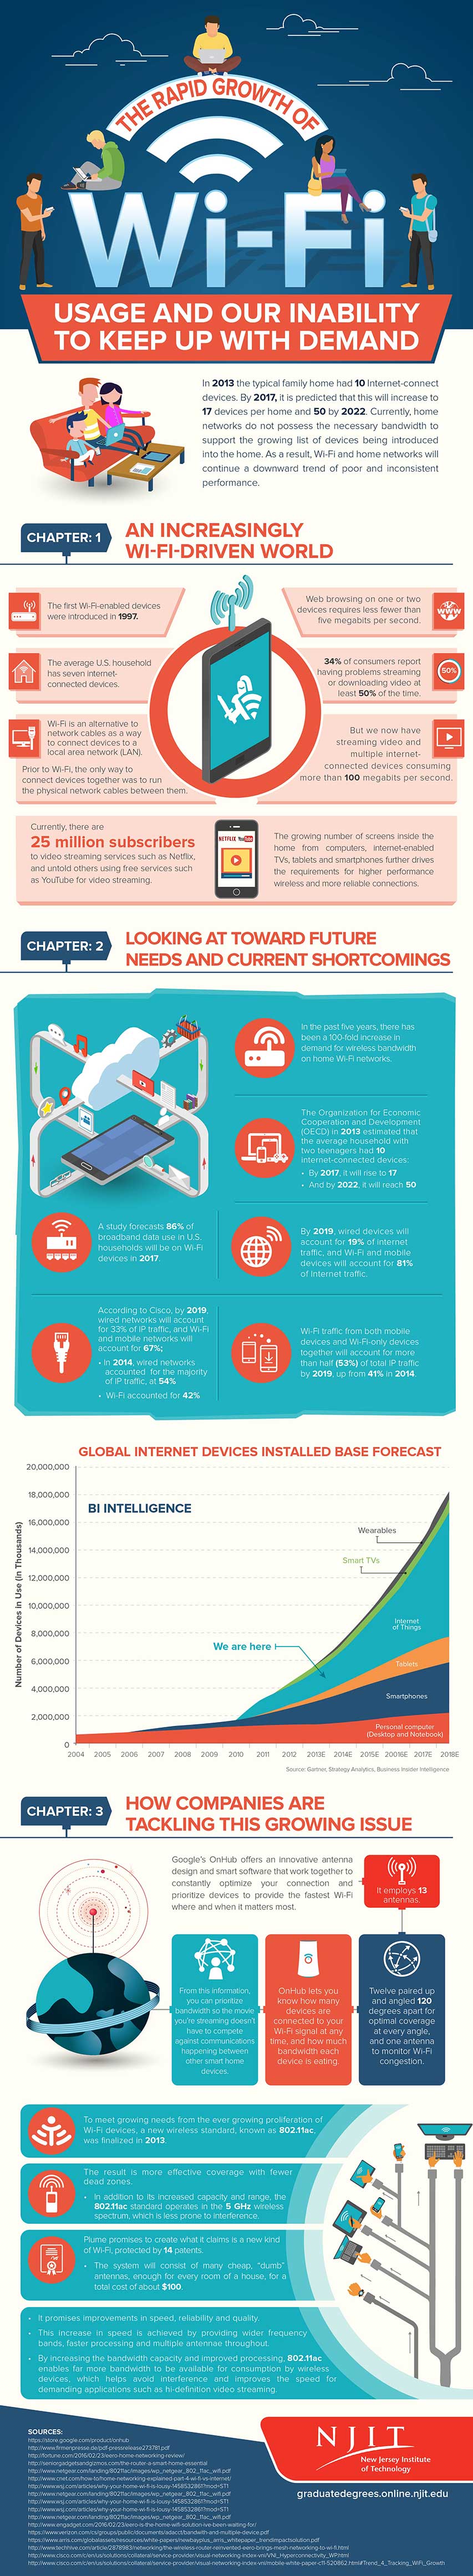 Over-Usage Of WiFi - Infographic